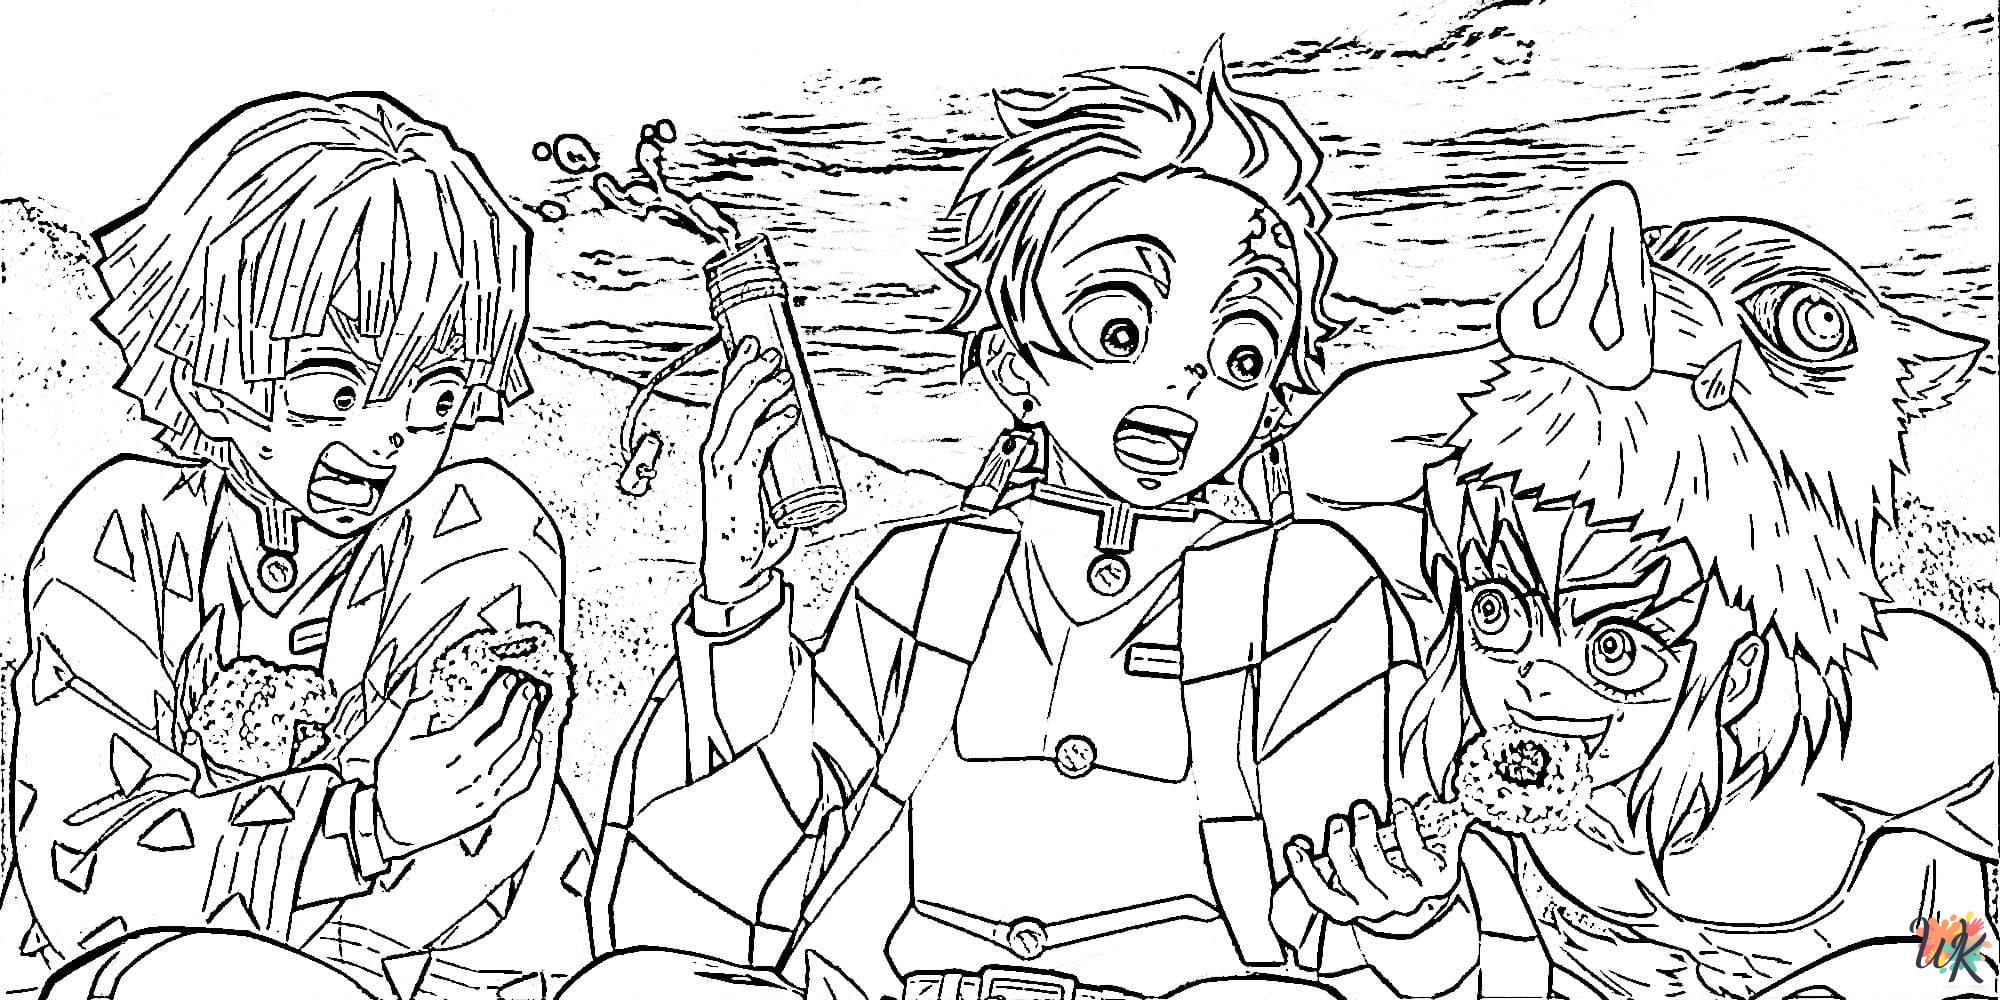 Inosuke coloring pages for adults